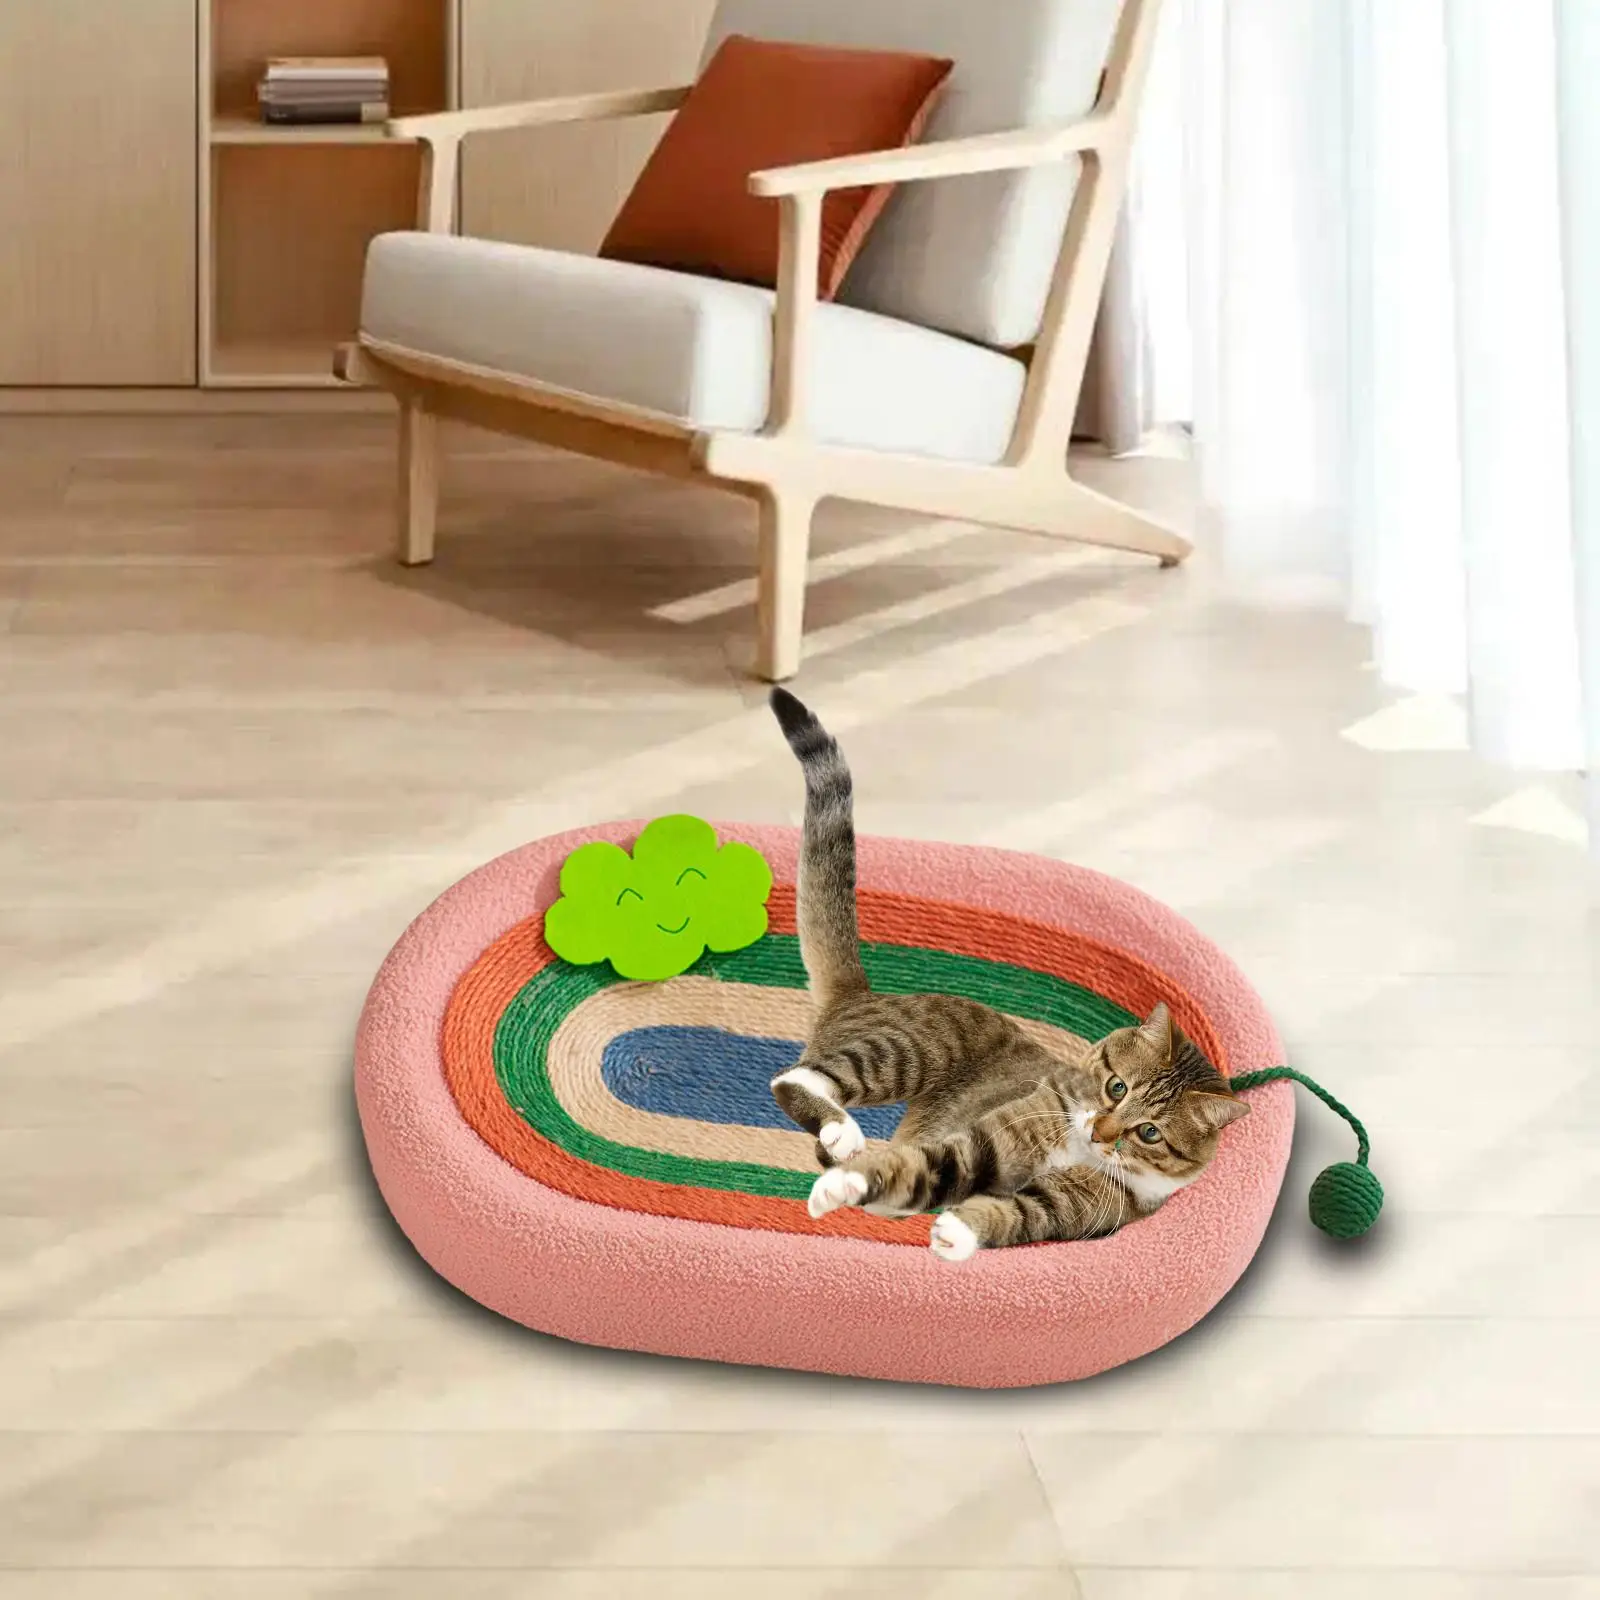 Cat Scratcher Board Lovely Prevents Furniture Damage Wear Resistant Scratch Pad Cat Kitty Training Toy for Furniture Protection